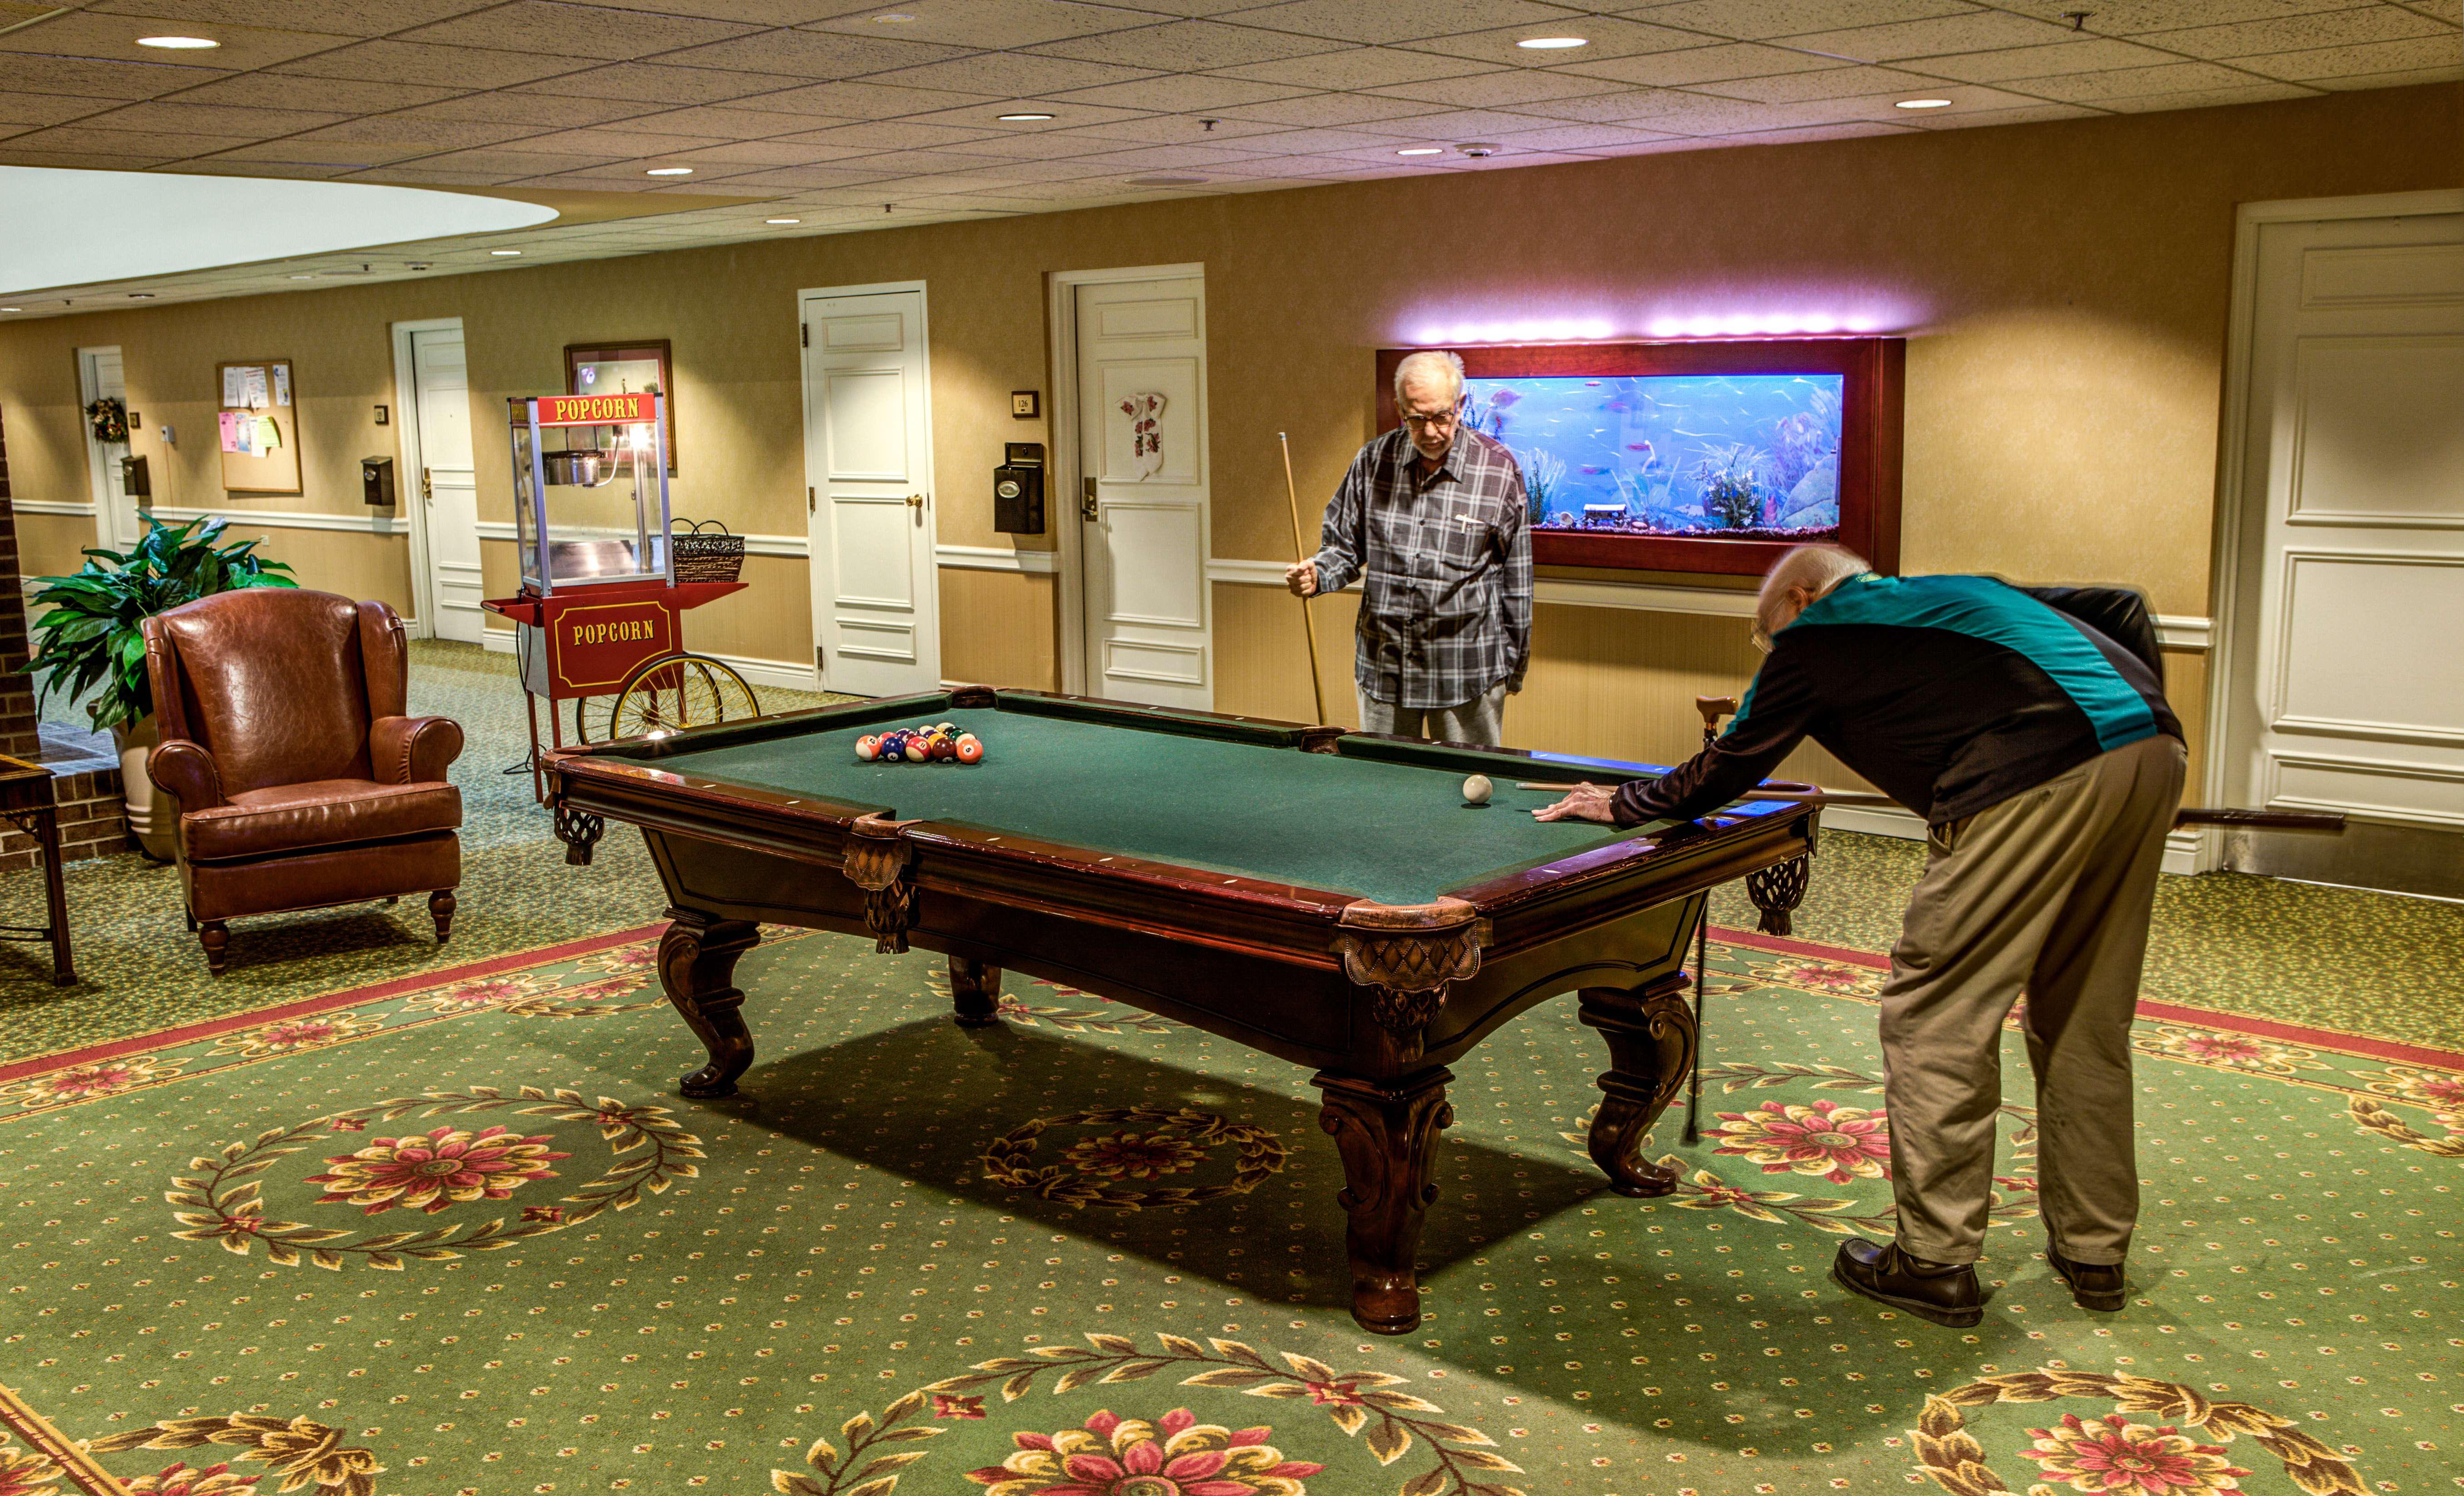 Church Creek has many games to keep you active.